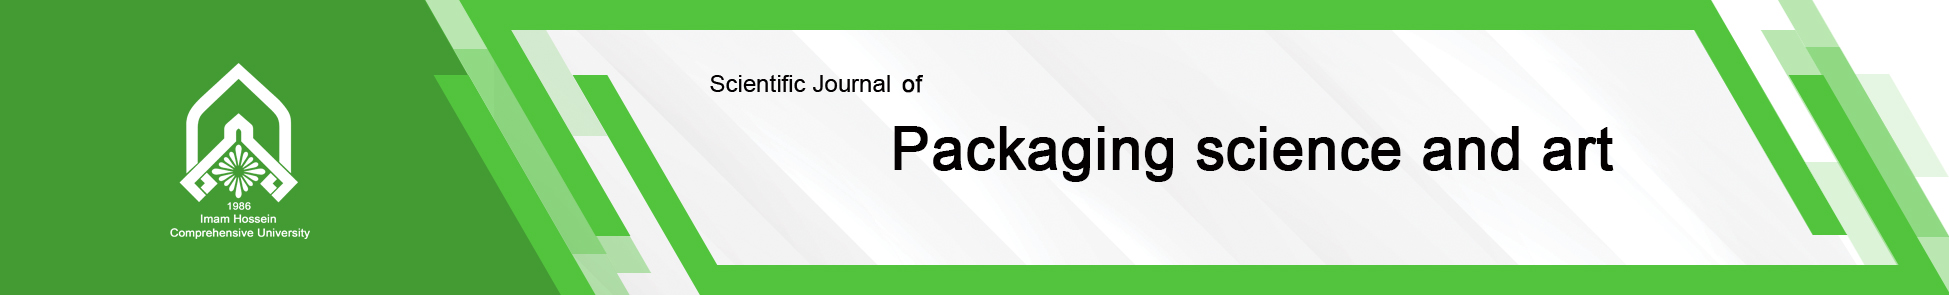 Scinentific Journal of Packaging science and art Interpreting the Communication Process Between Teachers & Students in the Packaging Design Courses Based on Jacobson's Theory